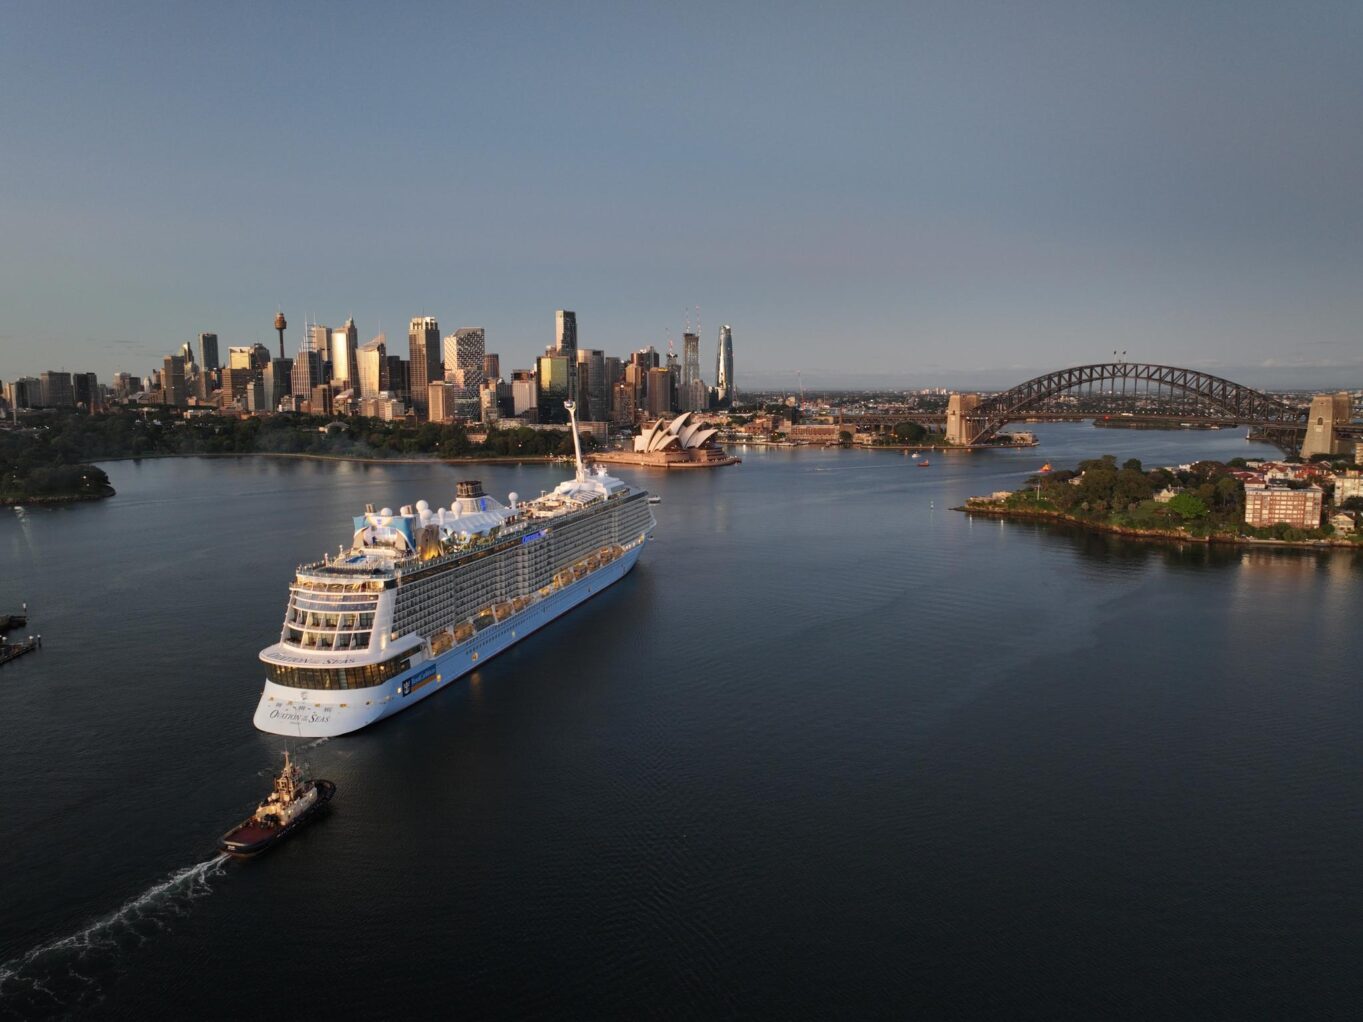 Ovation of the Seas sailing into Sydney Harbour